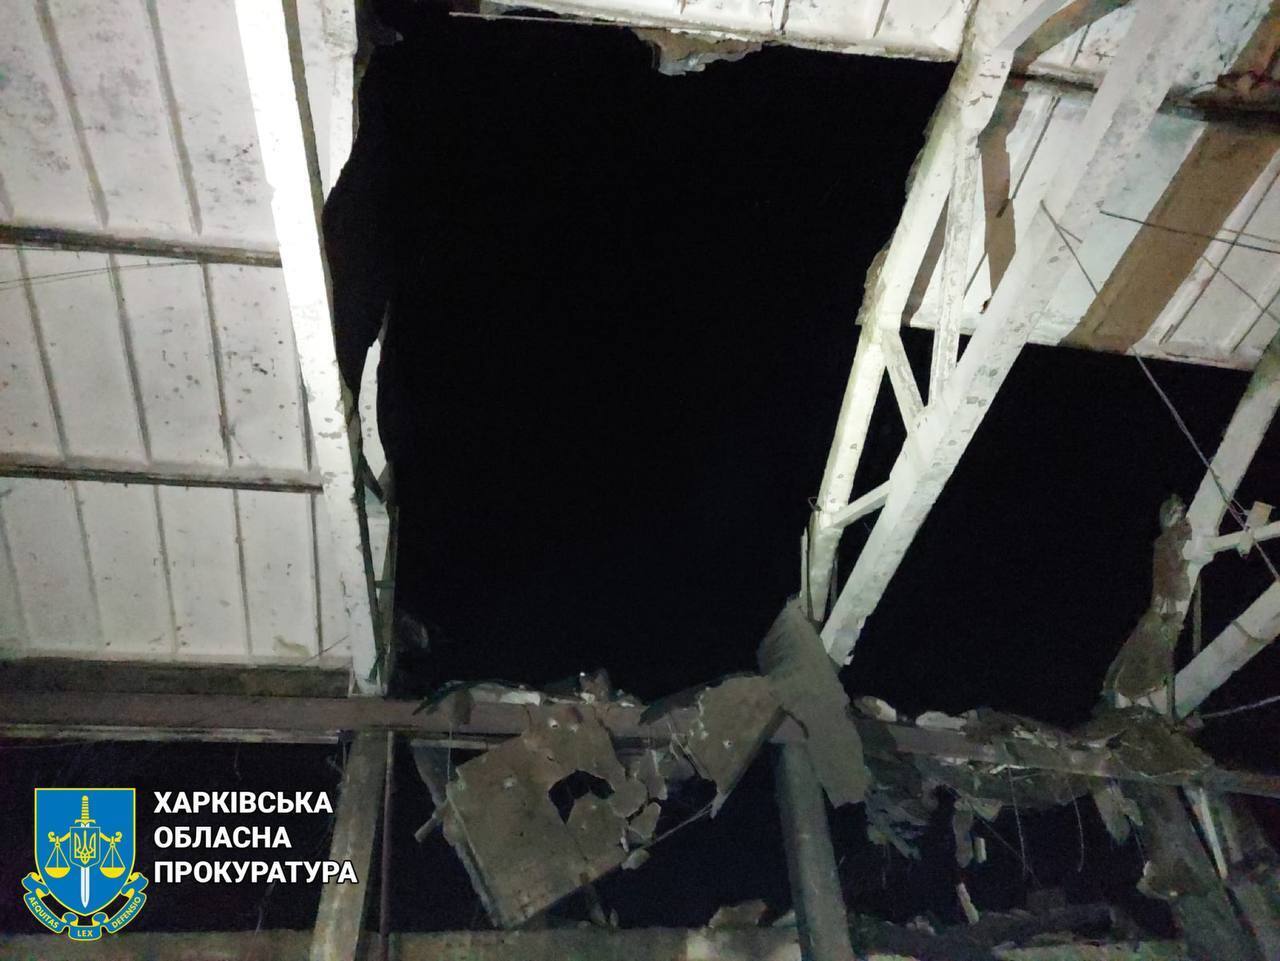 Russians attacked Kharkiv region: Chuhuiv was shelled with S-300 missiles. Photo